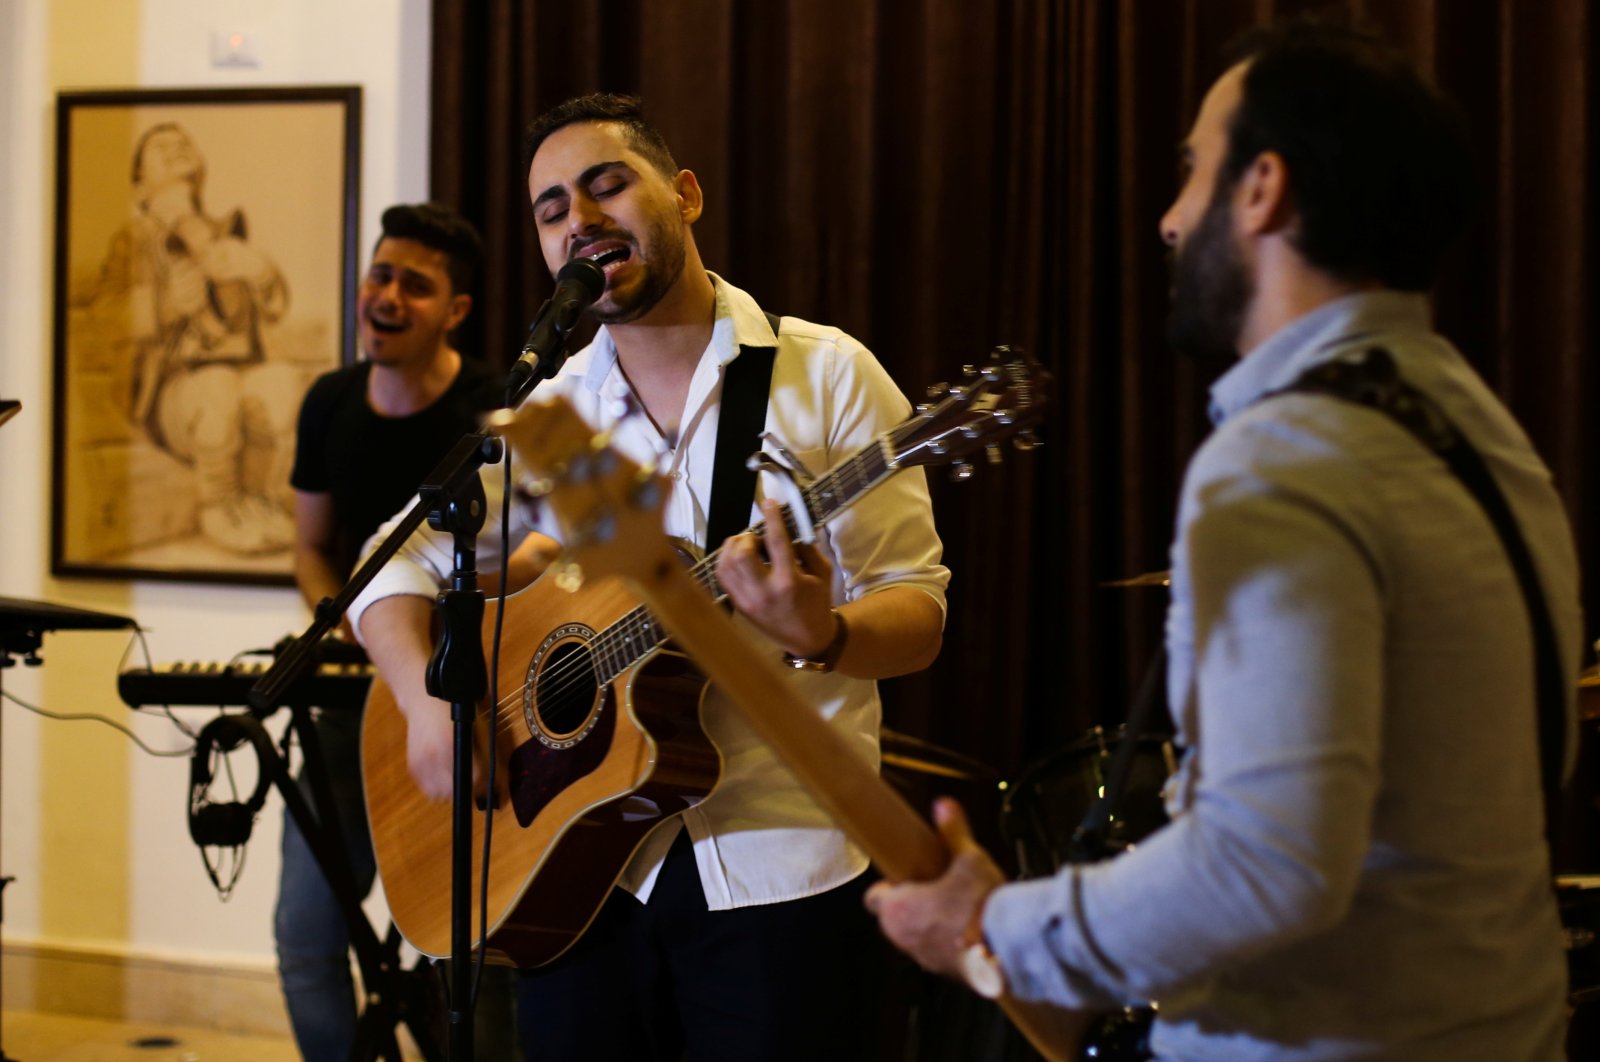 Palestinian accountant, Raji el-Jaru, sings and plays the guitar during a rehearsal for the first rock music band in Gaza City, Palestine, Aug. 1, 2021. (REUTERS Photo)